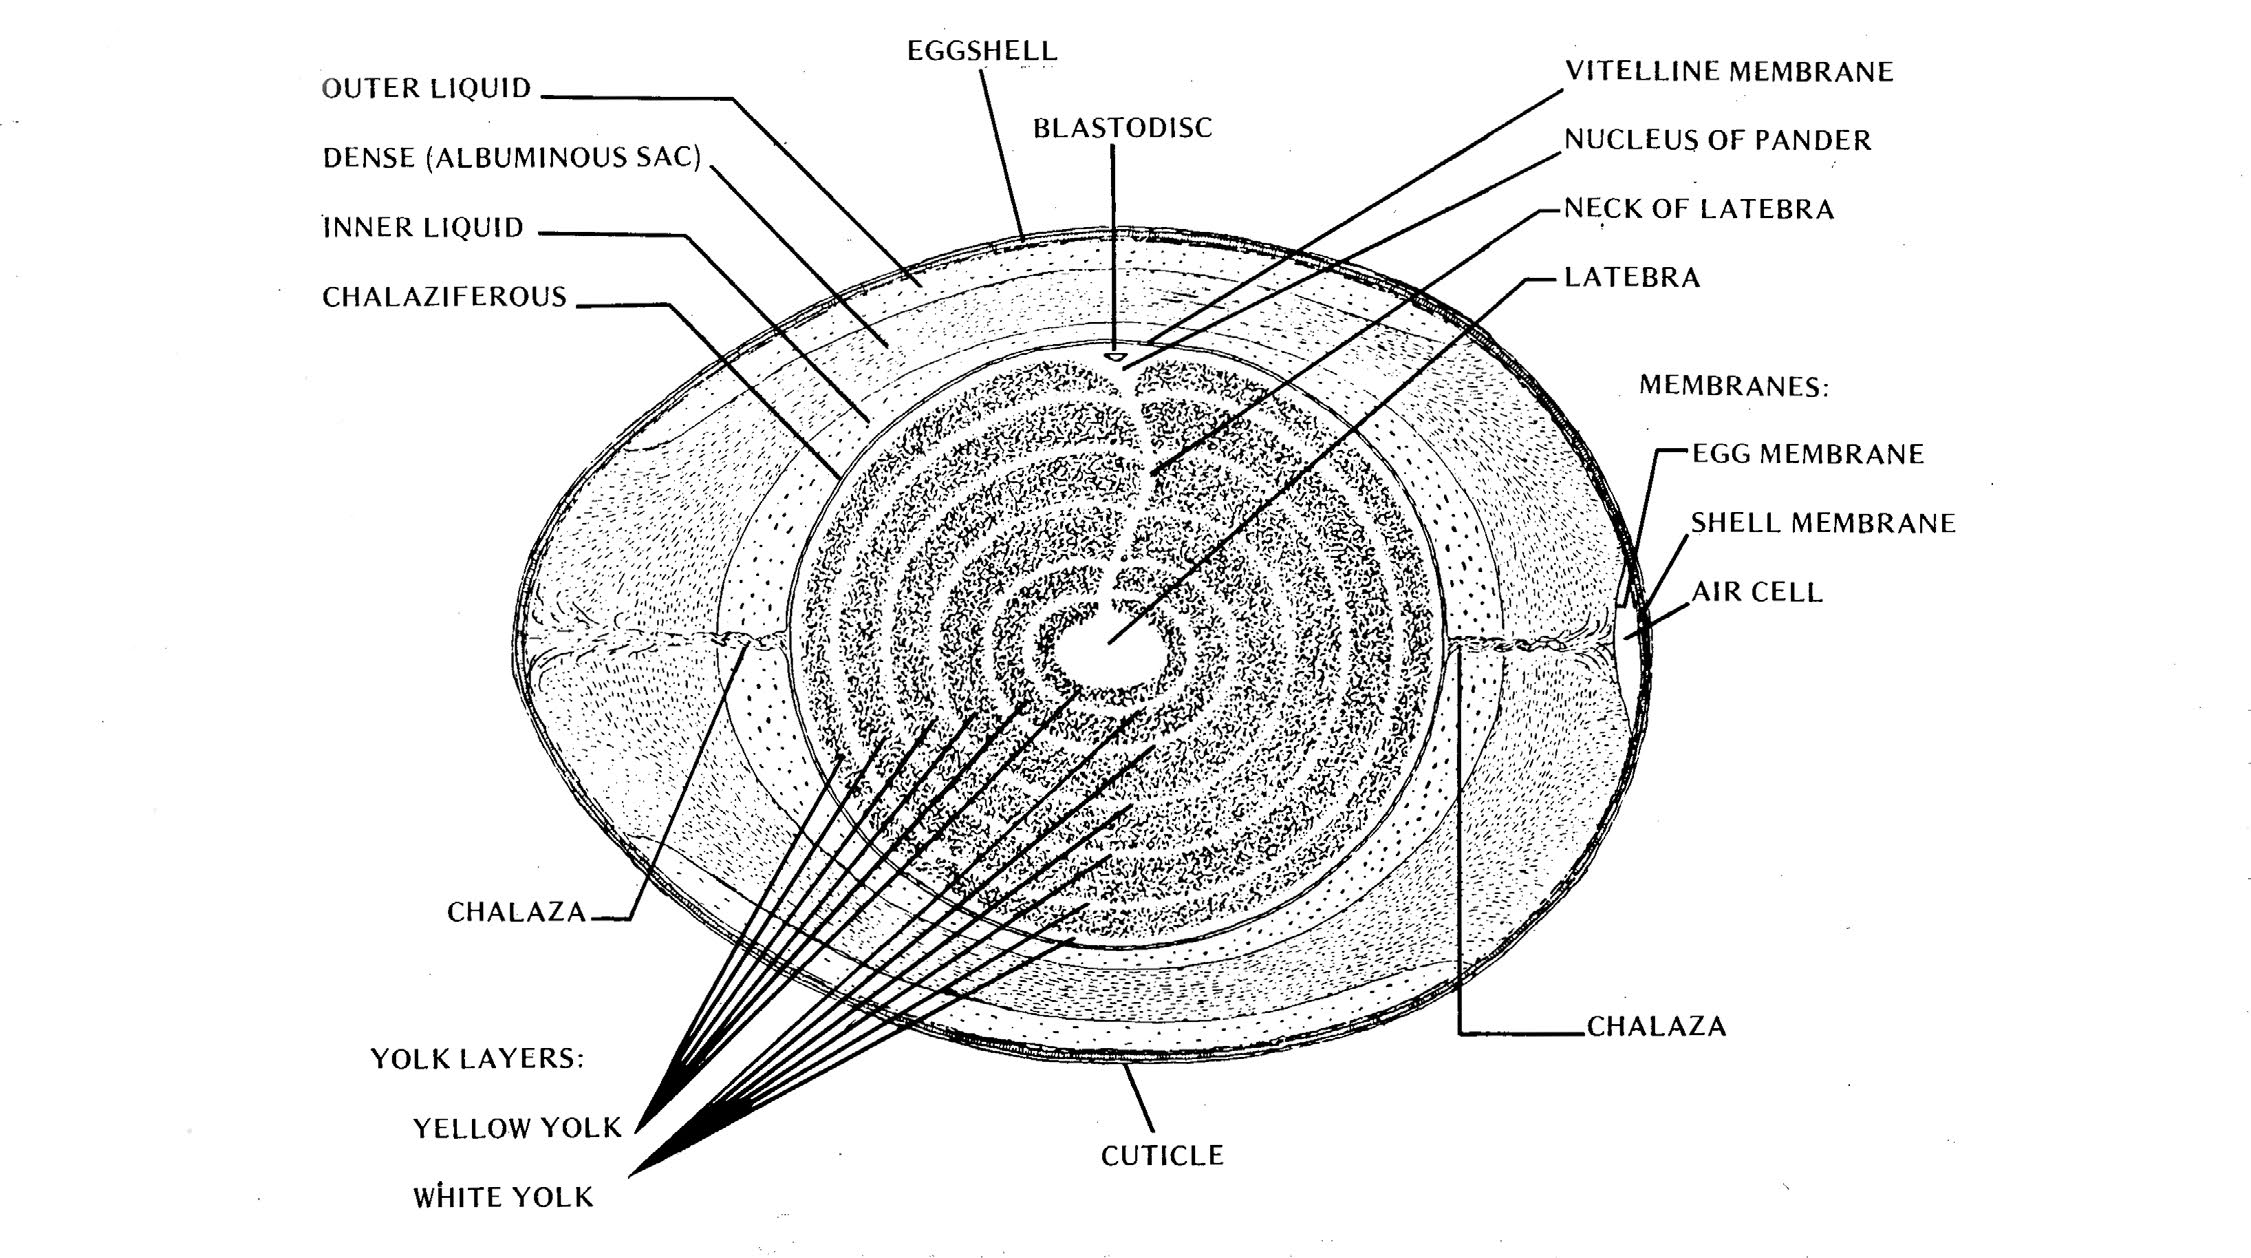 Figure of a hen's egg shown cross-sectioned. The center is the latebra, the layer immediately followin gis the yellow yolk, then the white yolk. Then there is the neck of latebra which runs from the latebra to the nucleus of pander. Sitting n the nucleus of pander is the blastodisc. Then is the vitelline membrane. Running from the vitelline membrane to the air cell and egg membrane (on both ends of the egg) is the chalaza. Tight past the vitelline membrane is the Chalaziferous, the inner liquid, the dense albuminous sac, and the outer liquid. All of t his is contained within the egg shell which is surrounded by a cuticle.